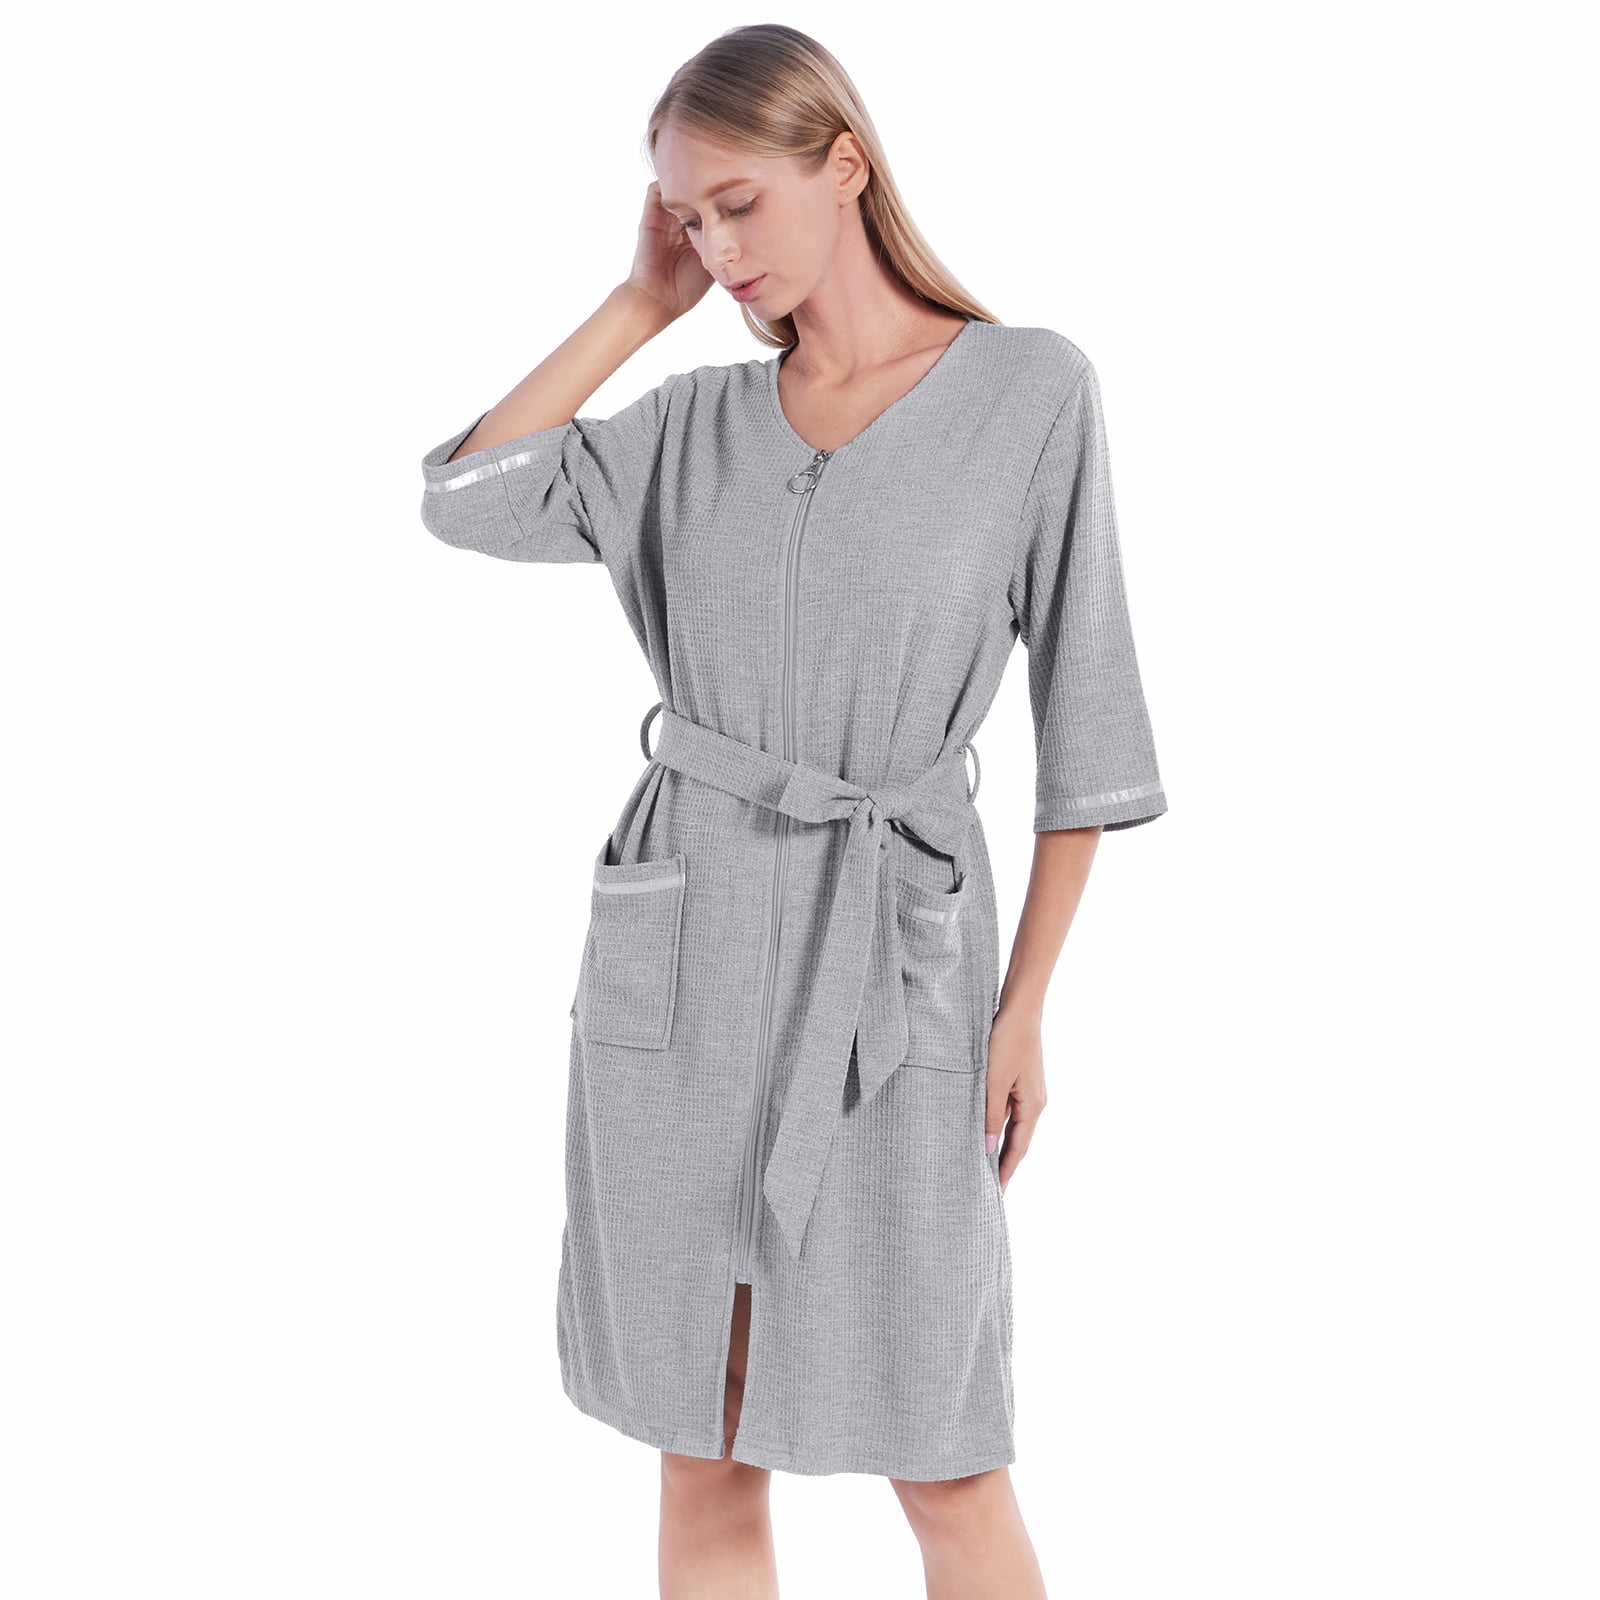 Zip-up Hooded Long Sleeve Robe For Women, Ideal For Spring, Autumn And  Winter, Light Grey | SHEIN EUR